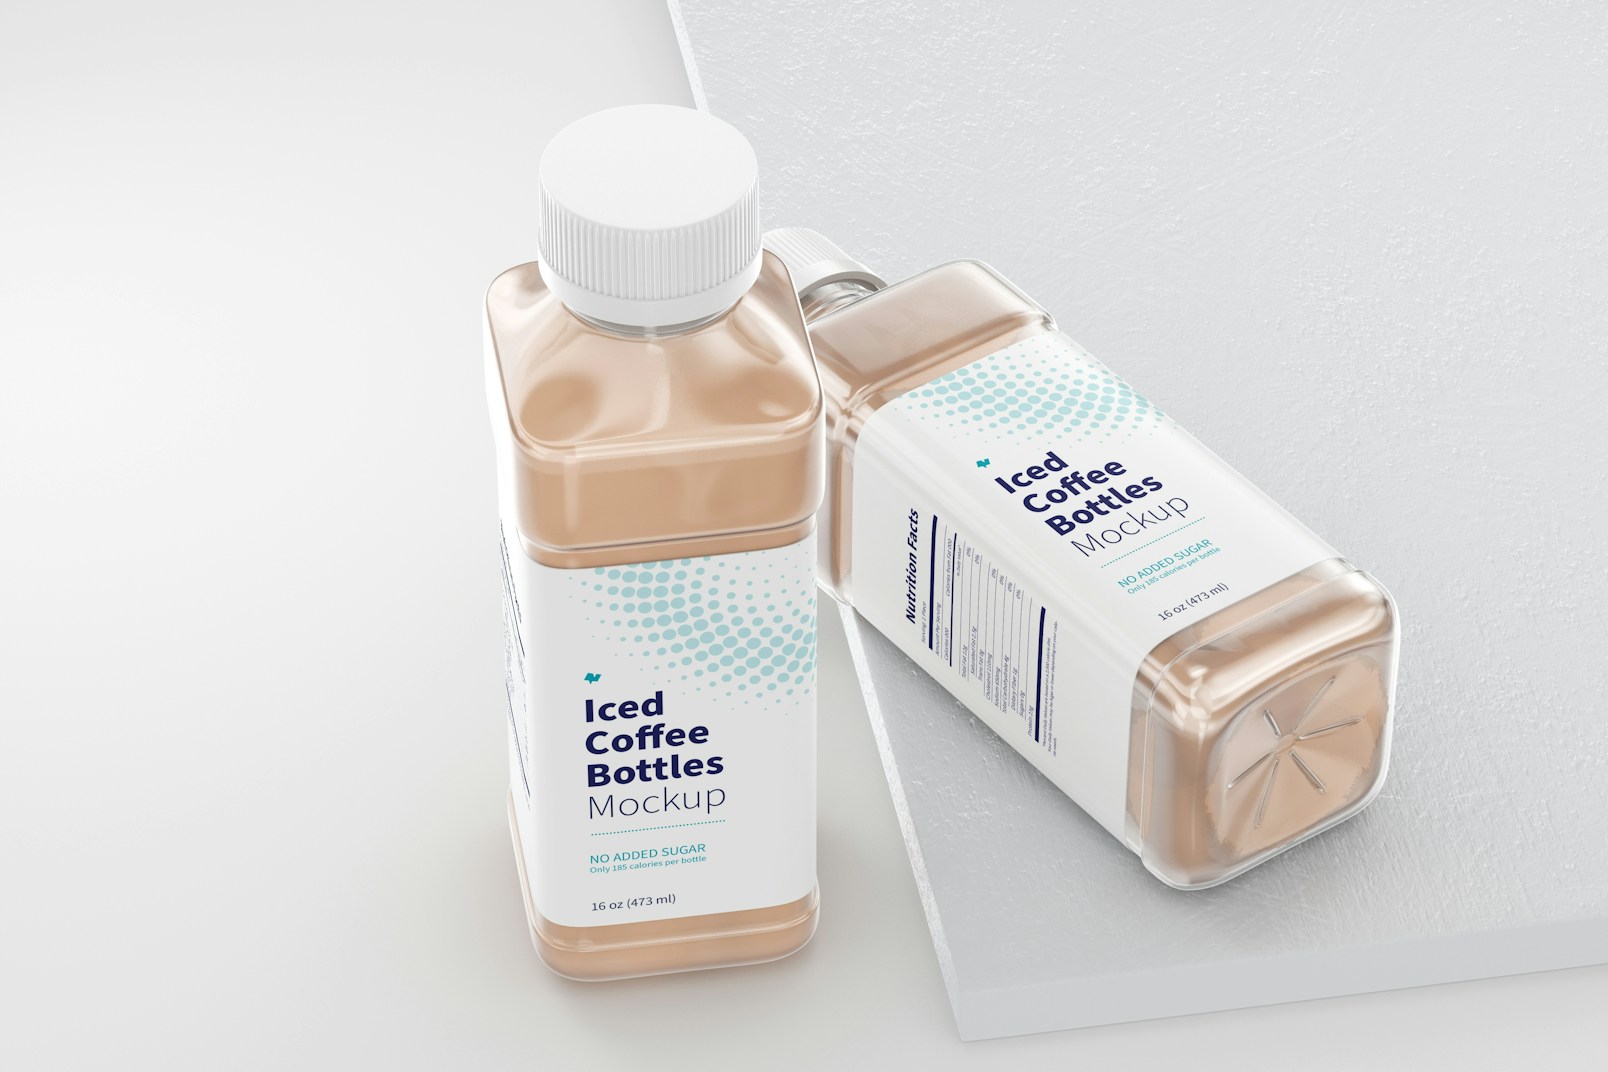 16 oz Iced Coffee Bottles Mockup, Standing and Dropped